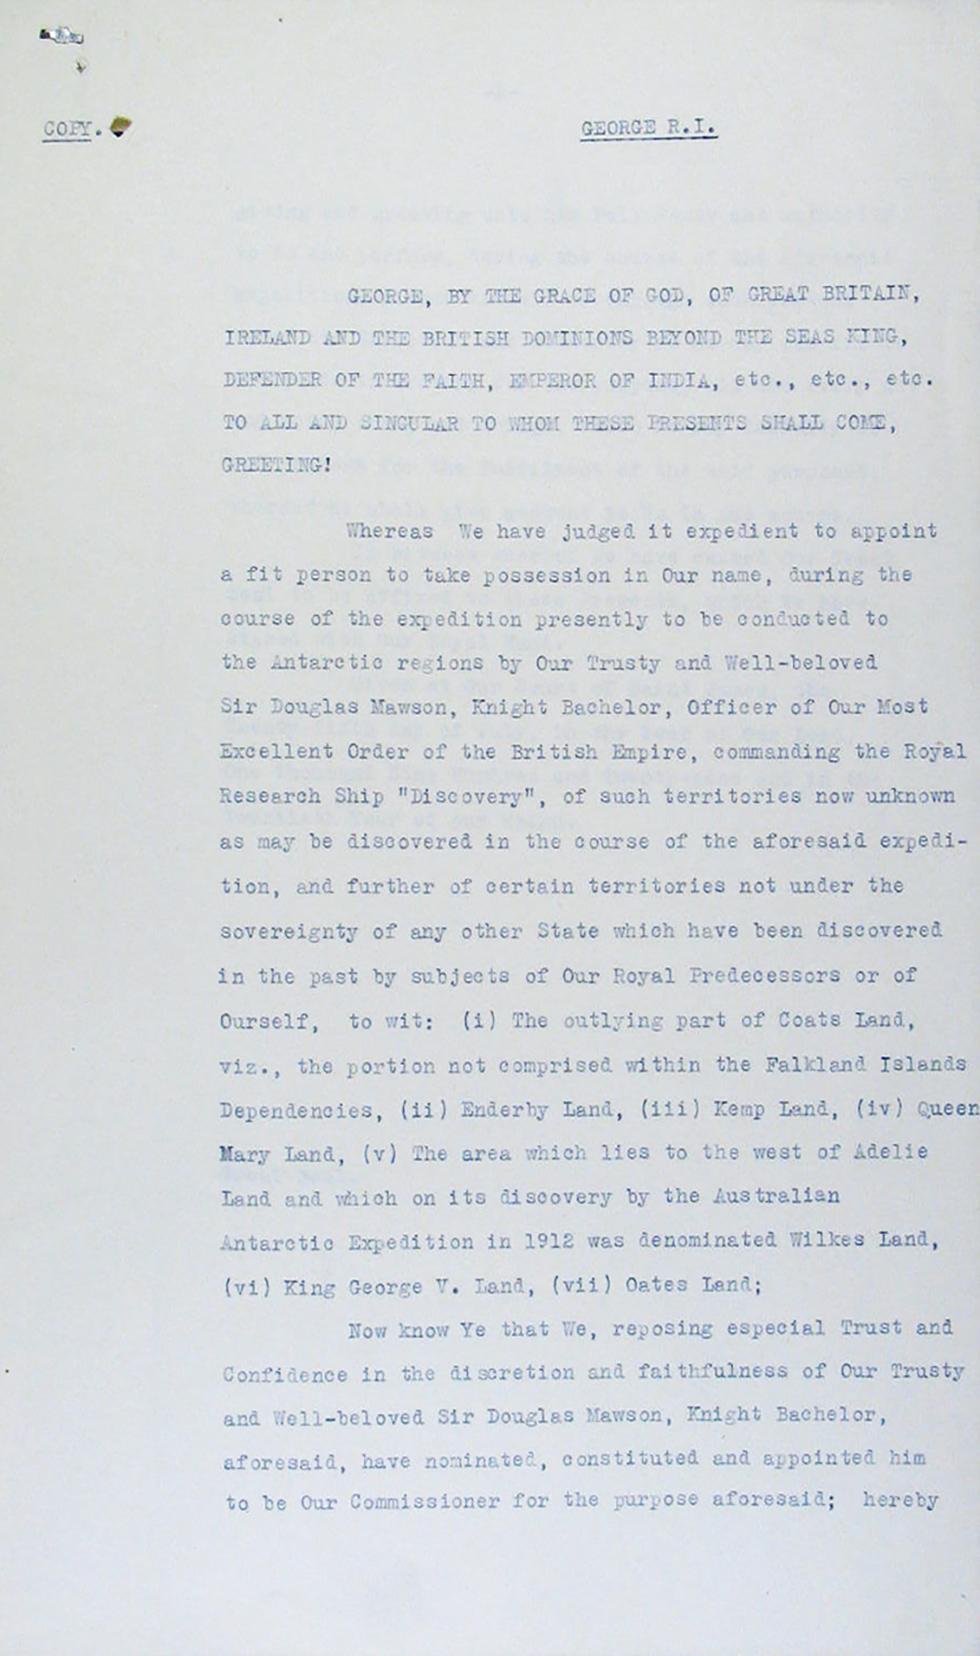 Copy of the King's commission to Sir Douglas Mawson.